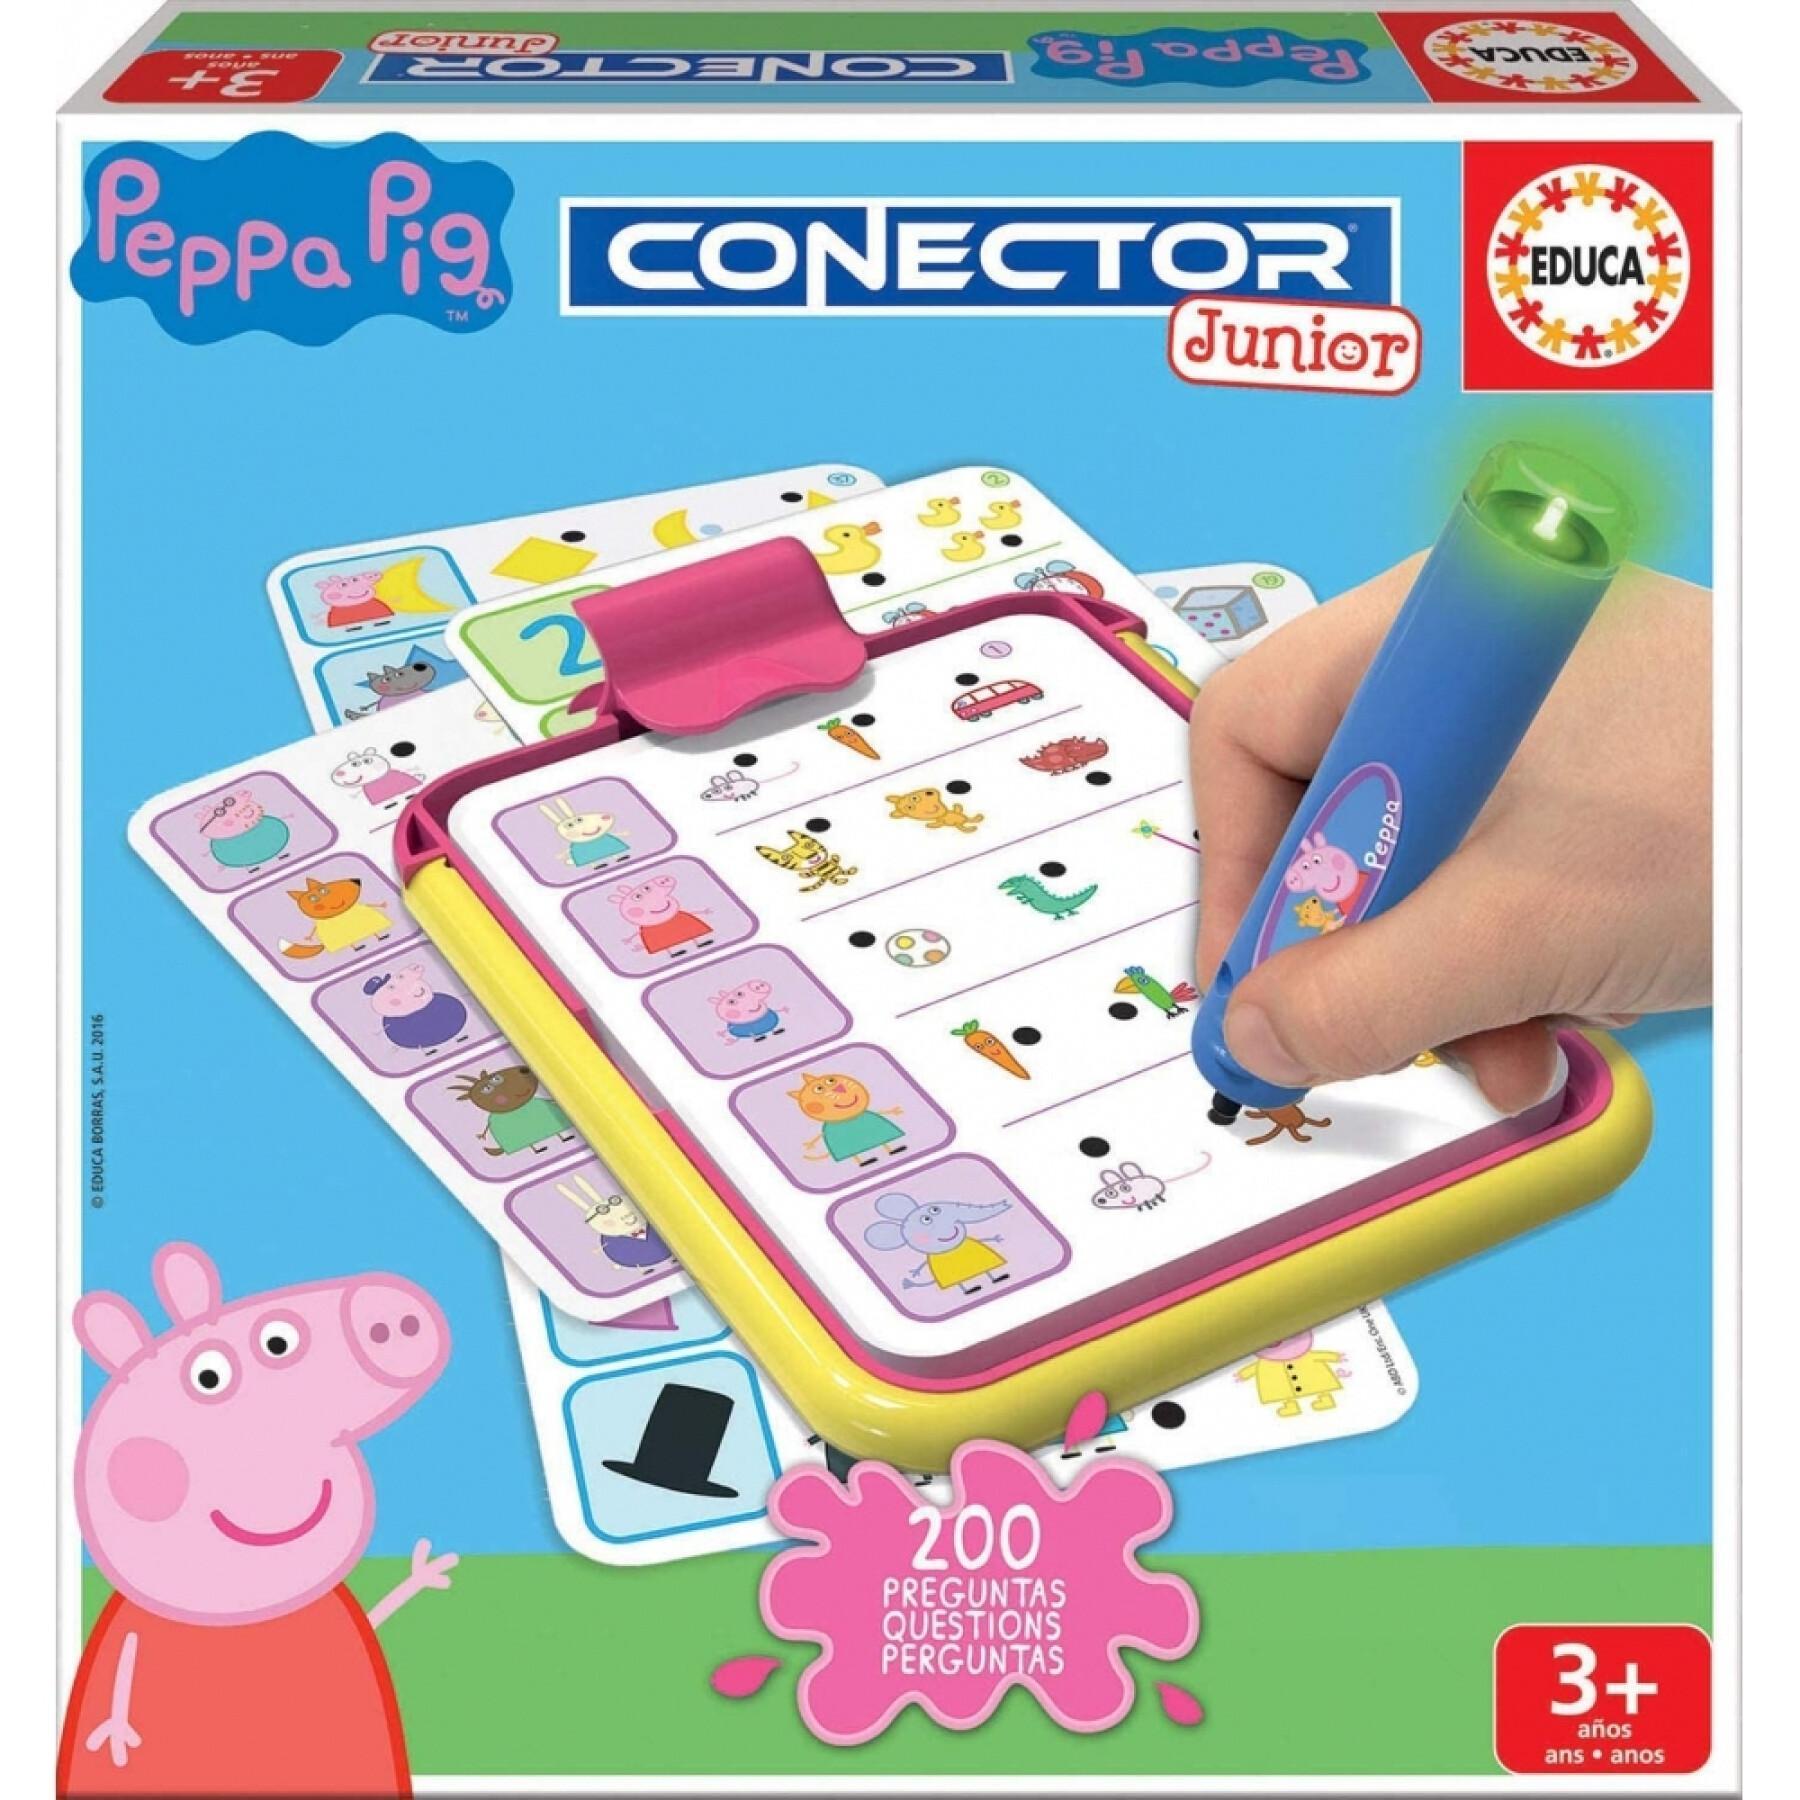 Educational question and answer games Peppa Pig Connector